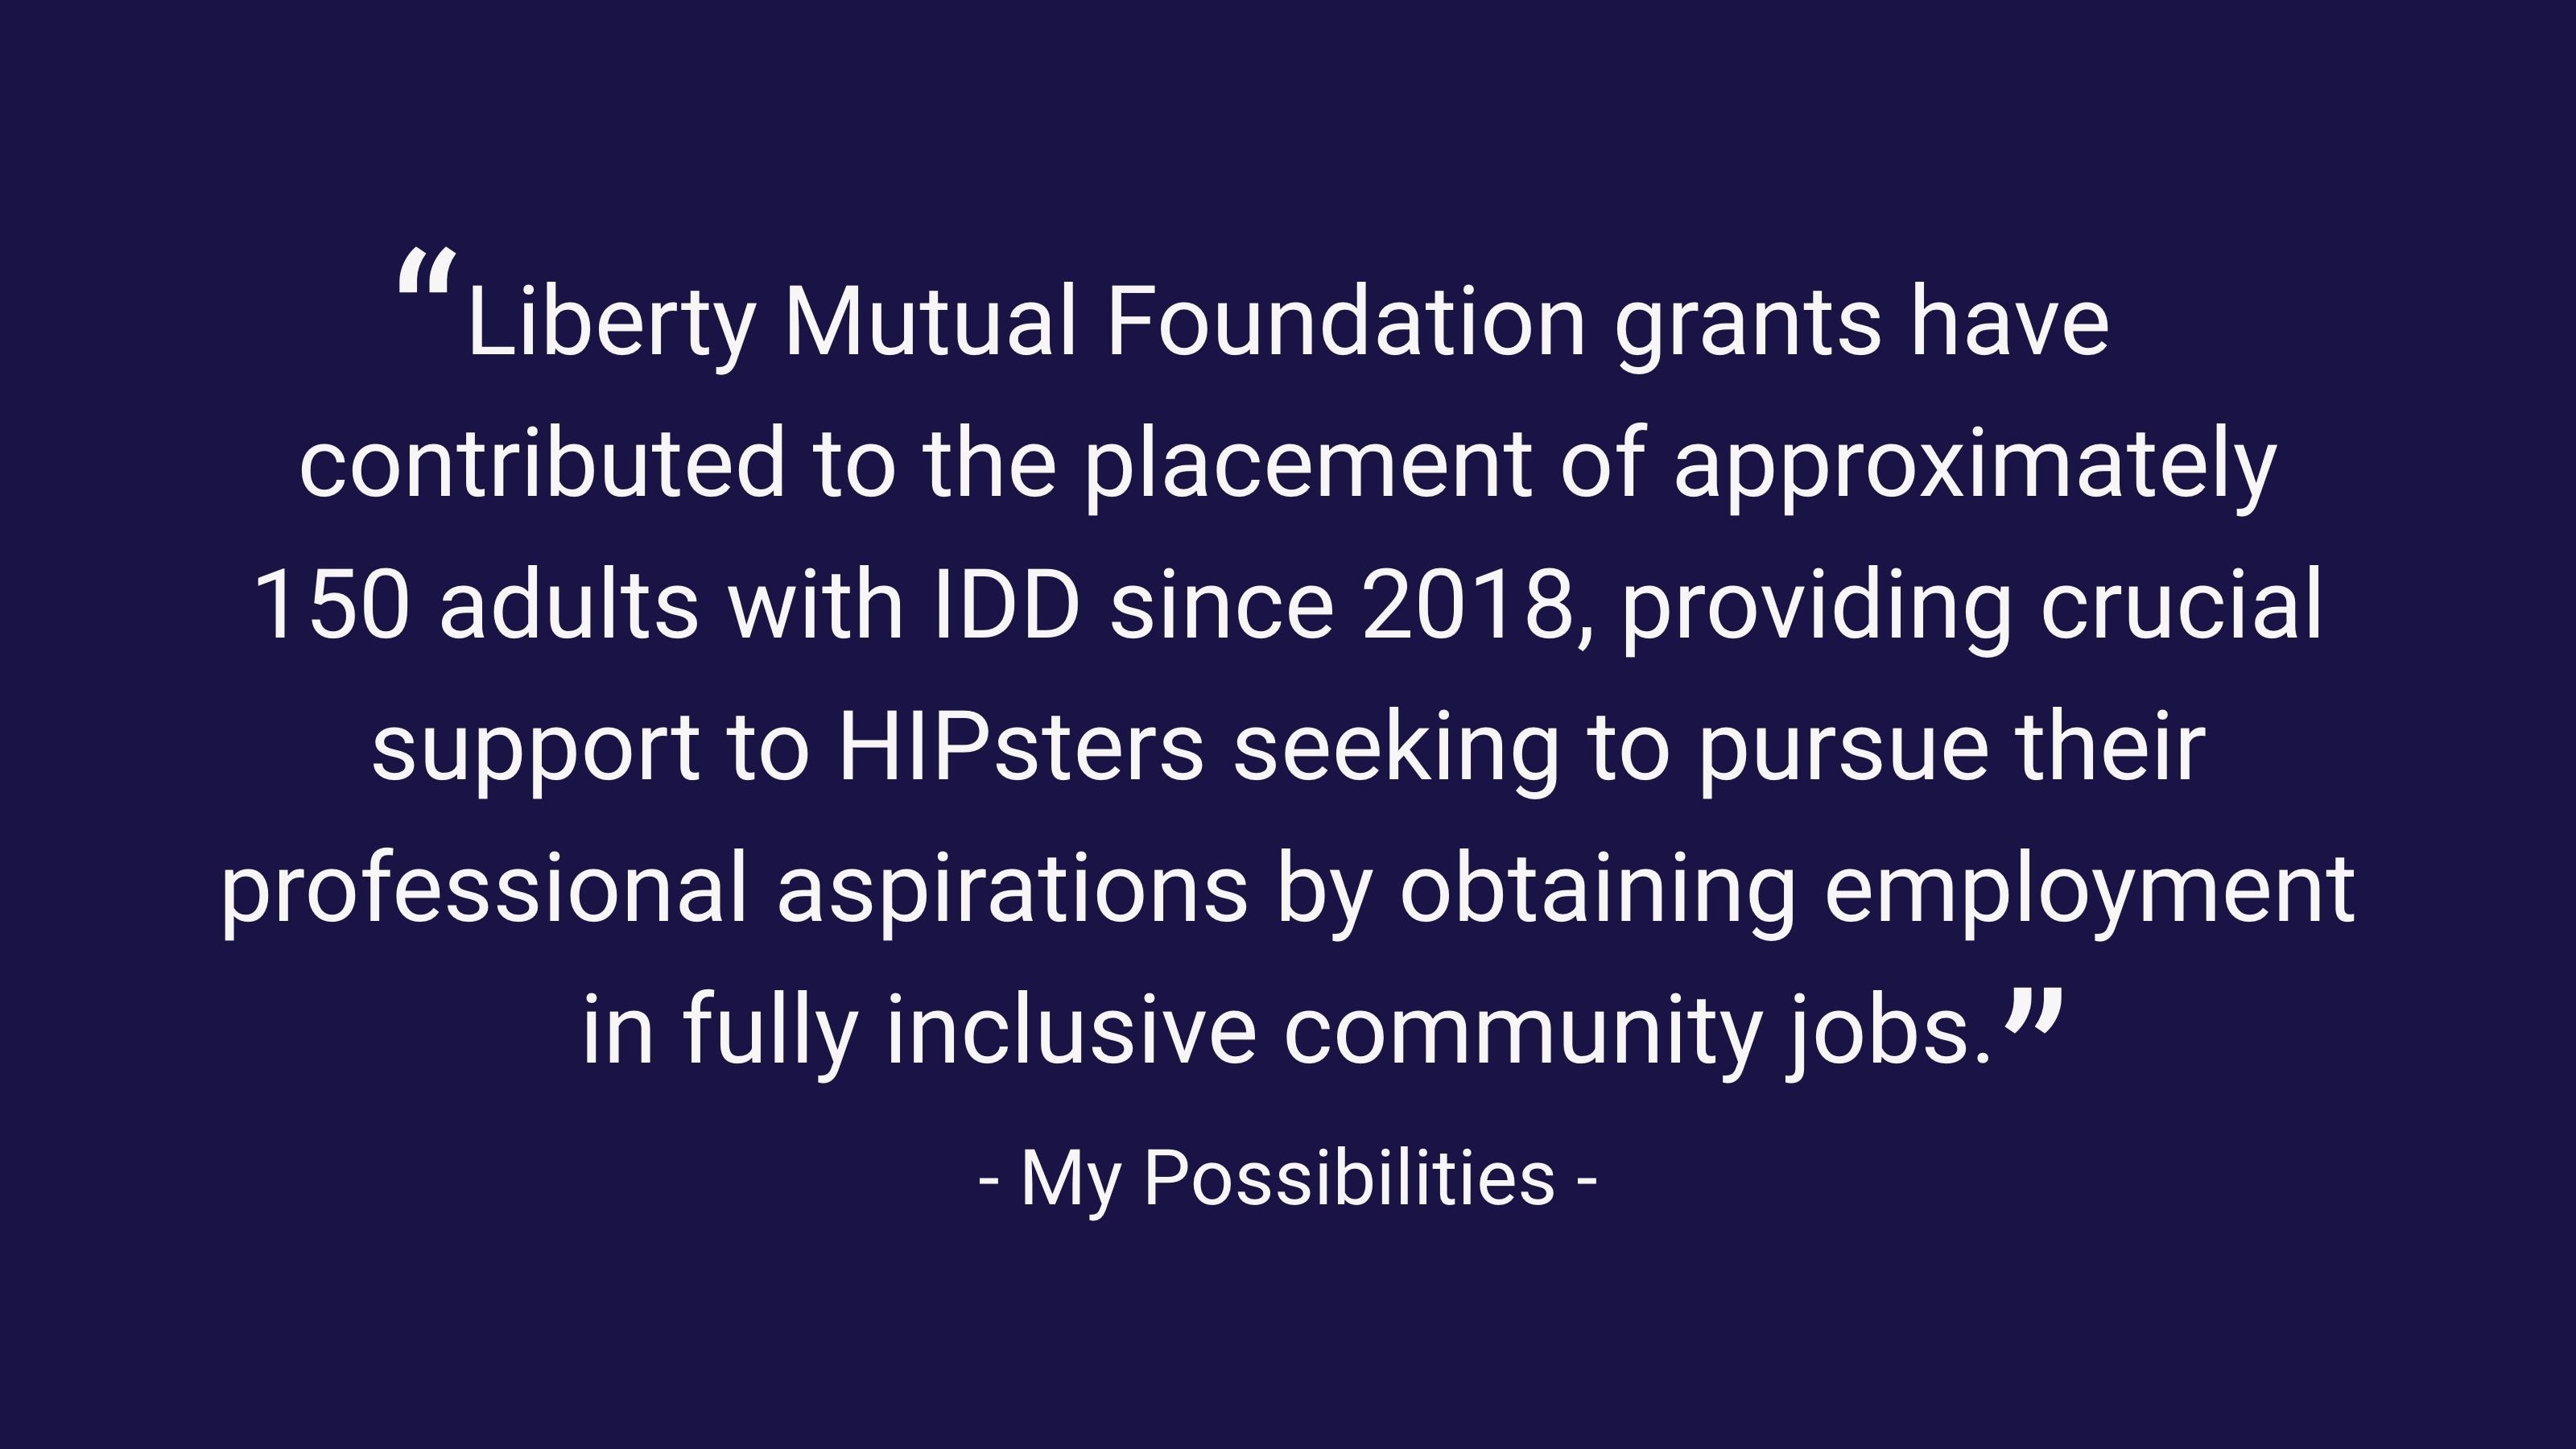 (slide 4 of 4) "Liberty Mutual Foundation grants have contributed to the placement of approximately 150 adults with IDD since 2018, providing crucial support to HIPsters seeking to pursue their professional aspirations by obtaining employment in fully inclusive community jobs." - My Possibilities . 